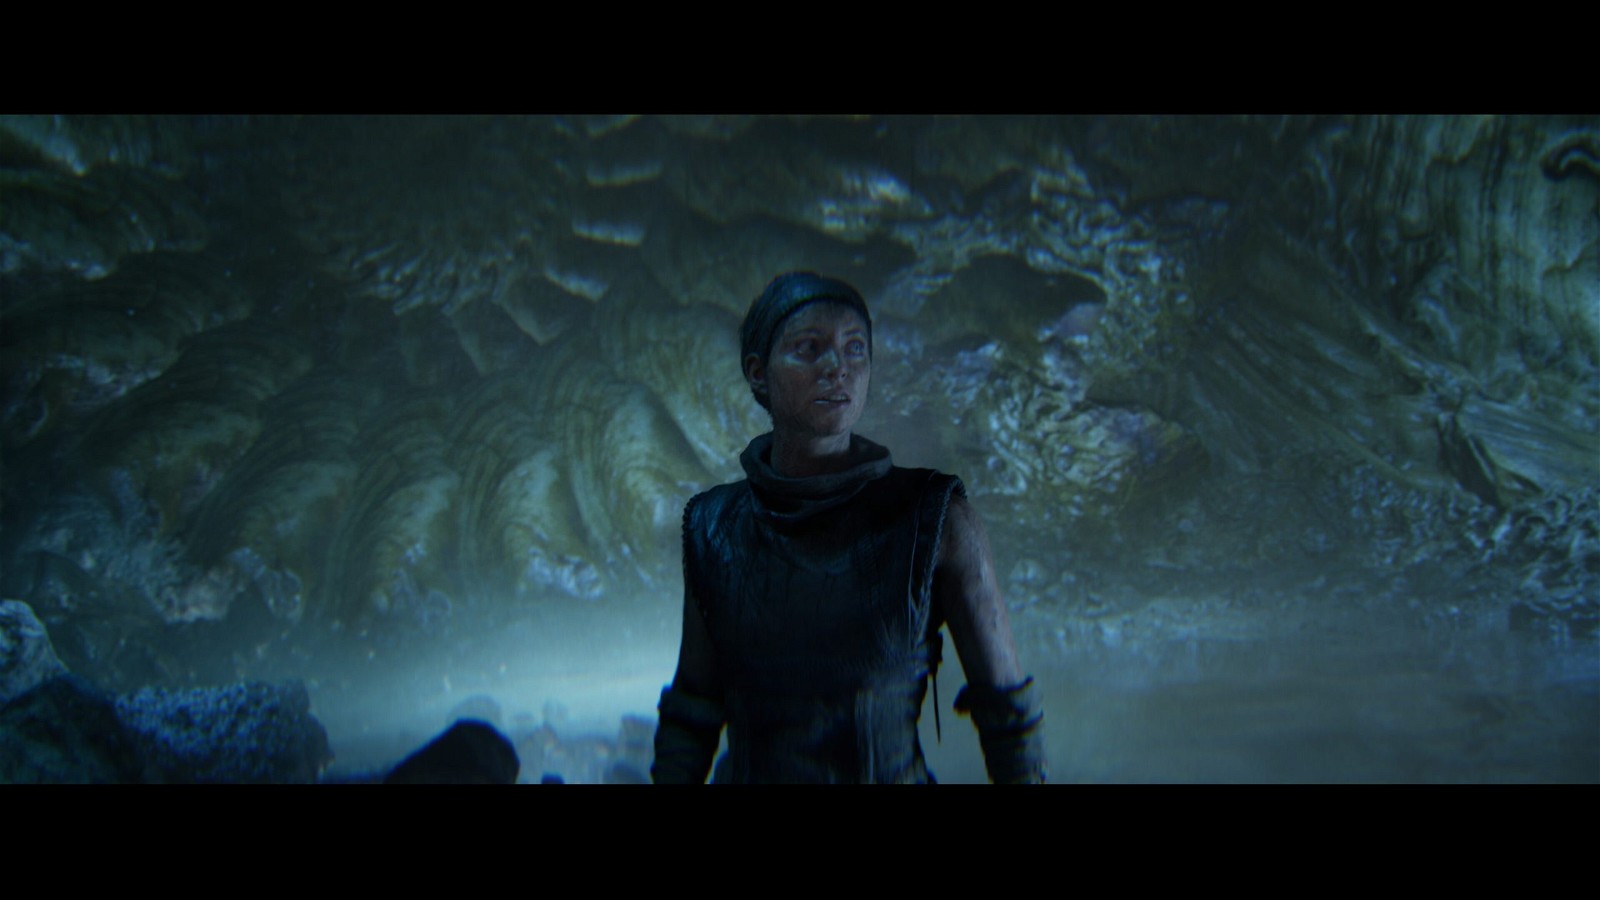 Senua's confidence in this particular scene is "eroded," and the meticulous facial animation shows it.